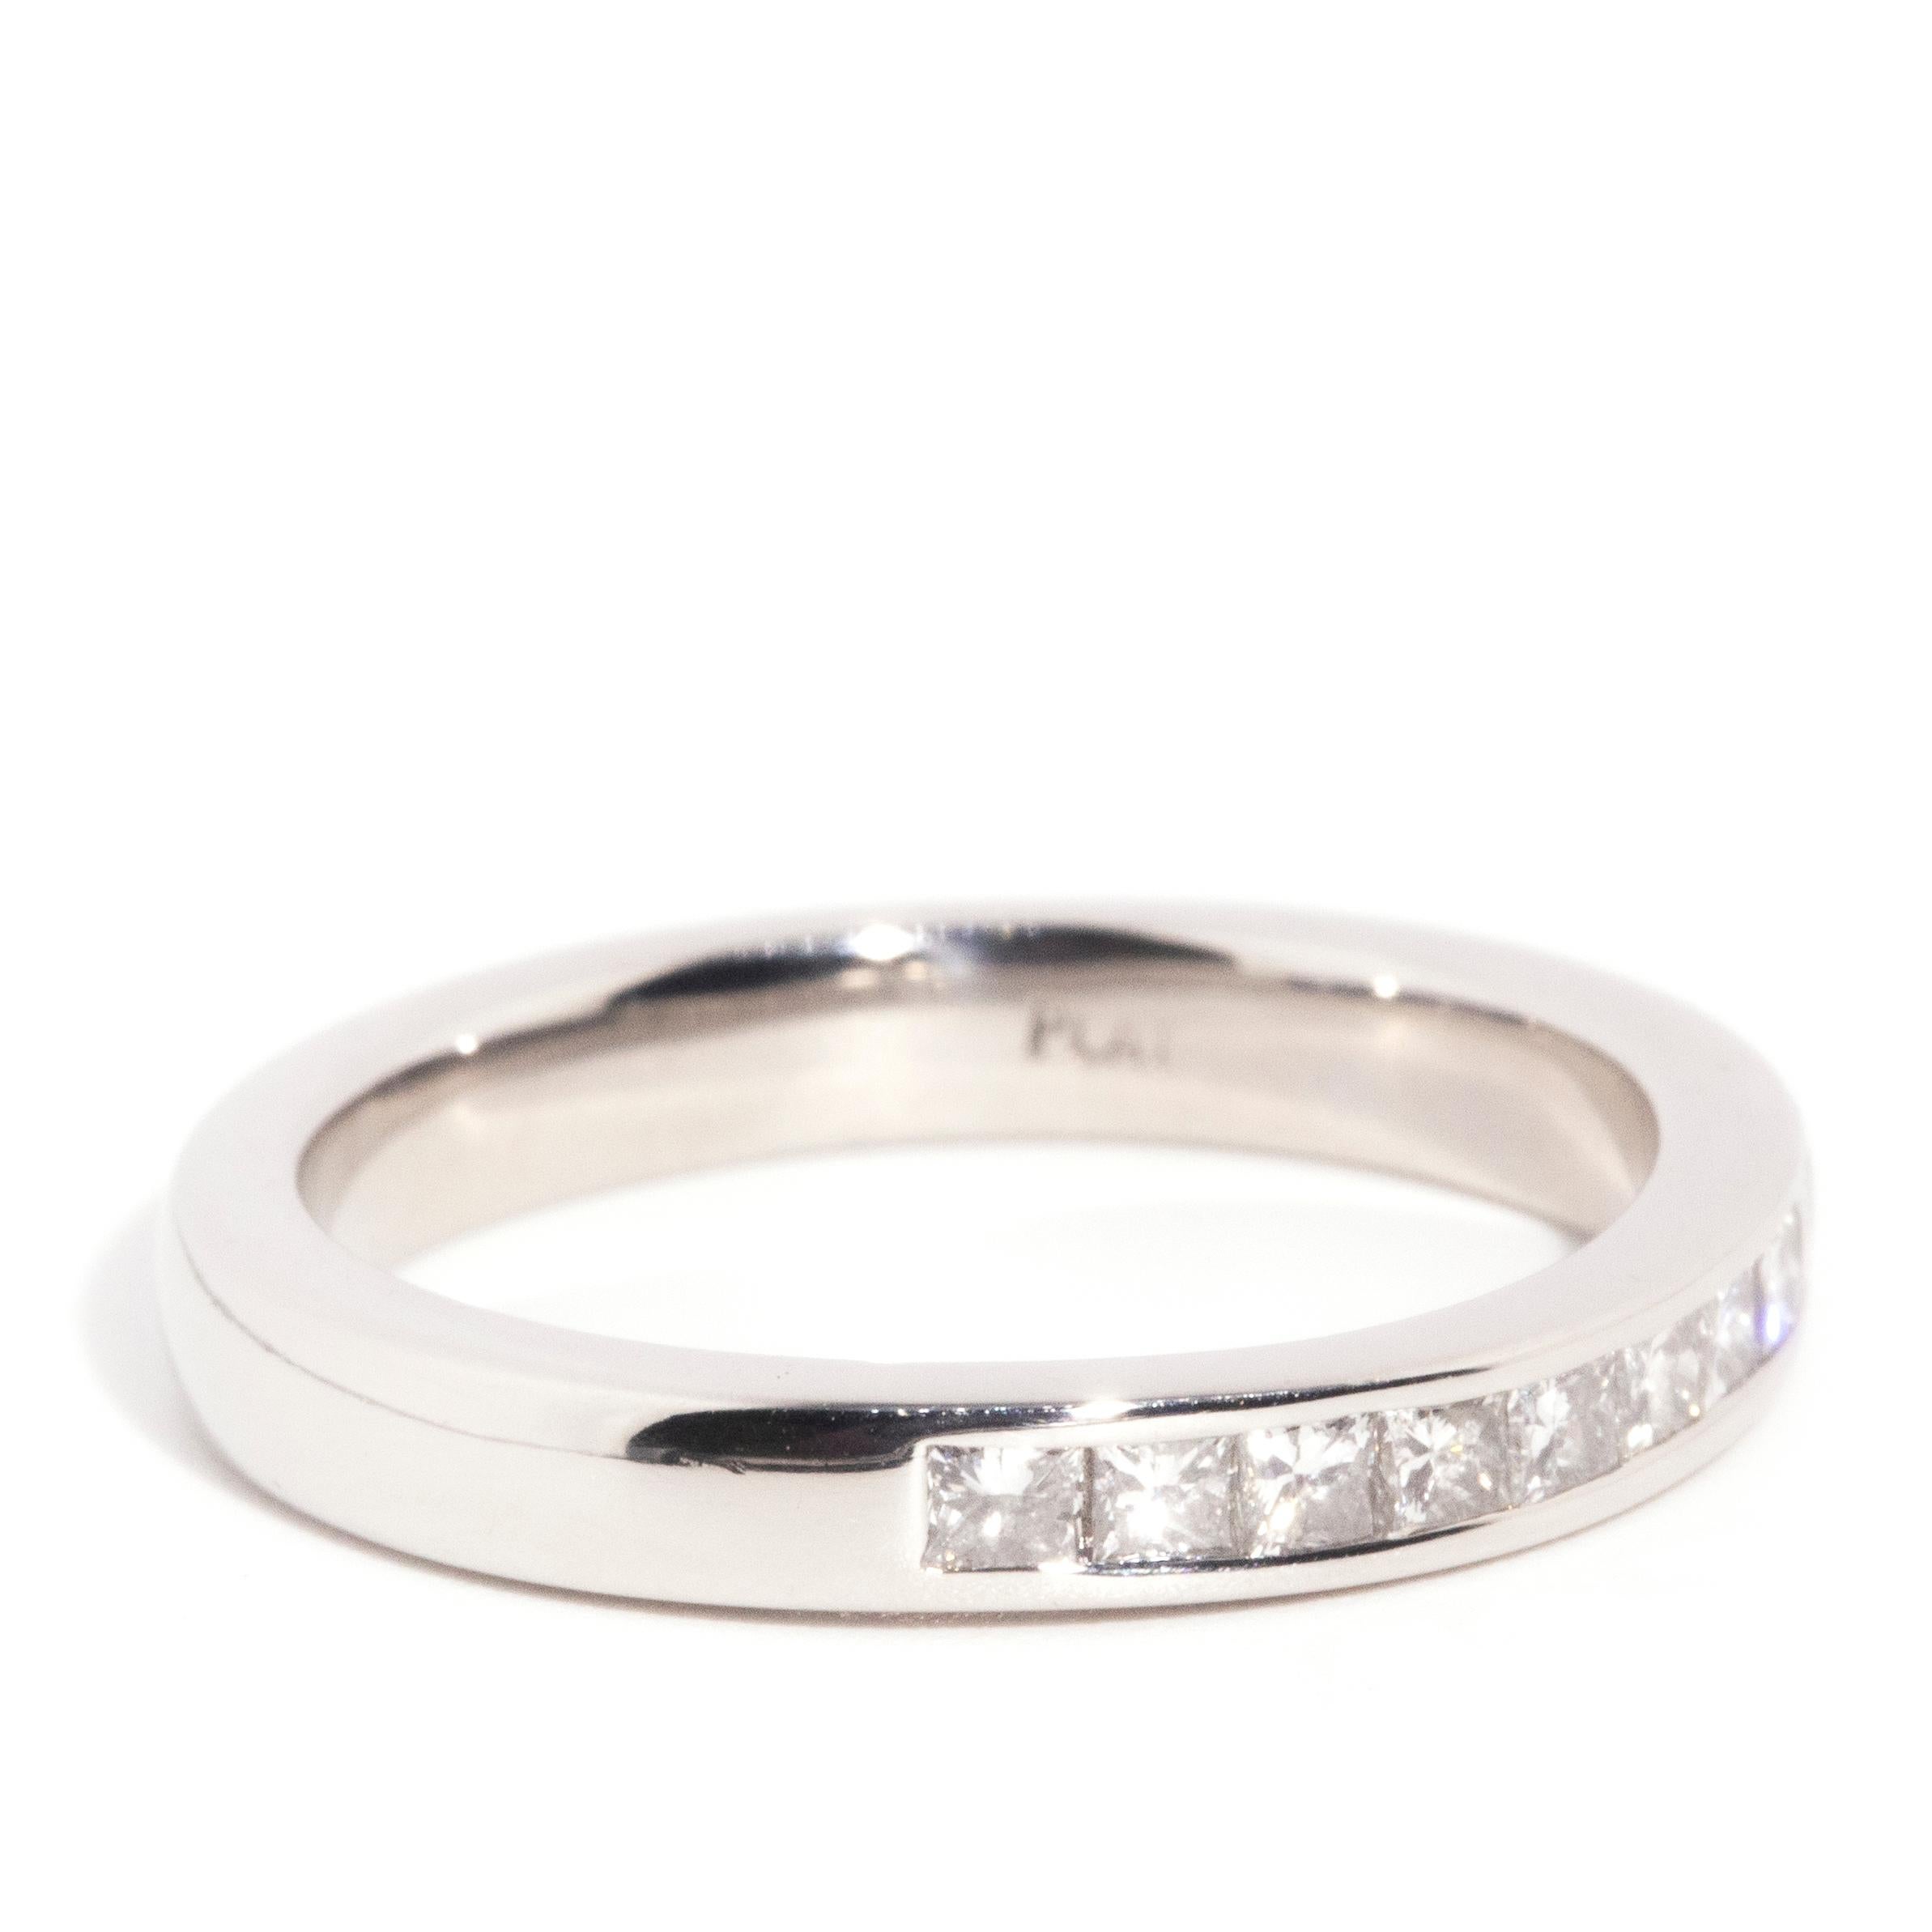 Forged in platinum, this lovely contemporary ring features a scintillating row of nine channel set princess cut diamonds along the front of a gleaming white band. We have named this darling adornment The Raziel Ring. Perfect to wear alone or stacked